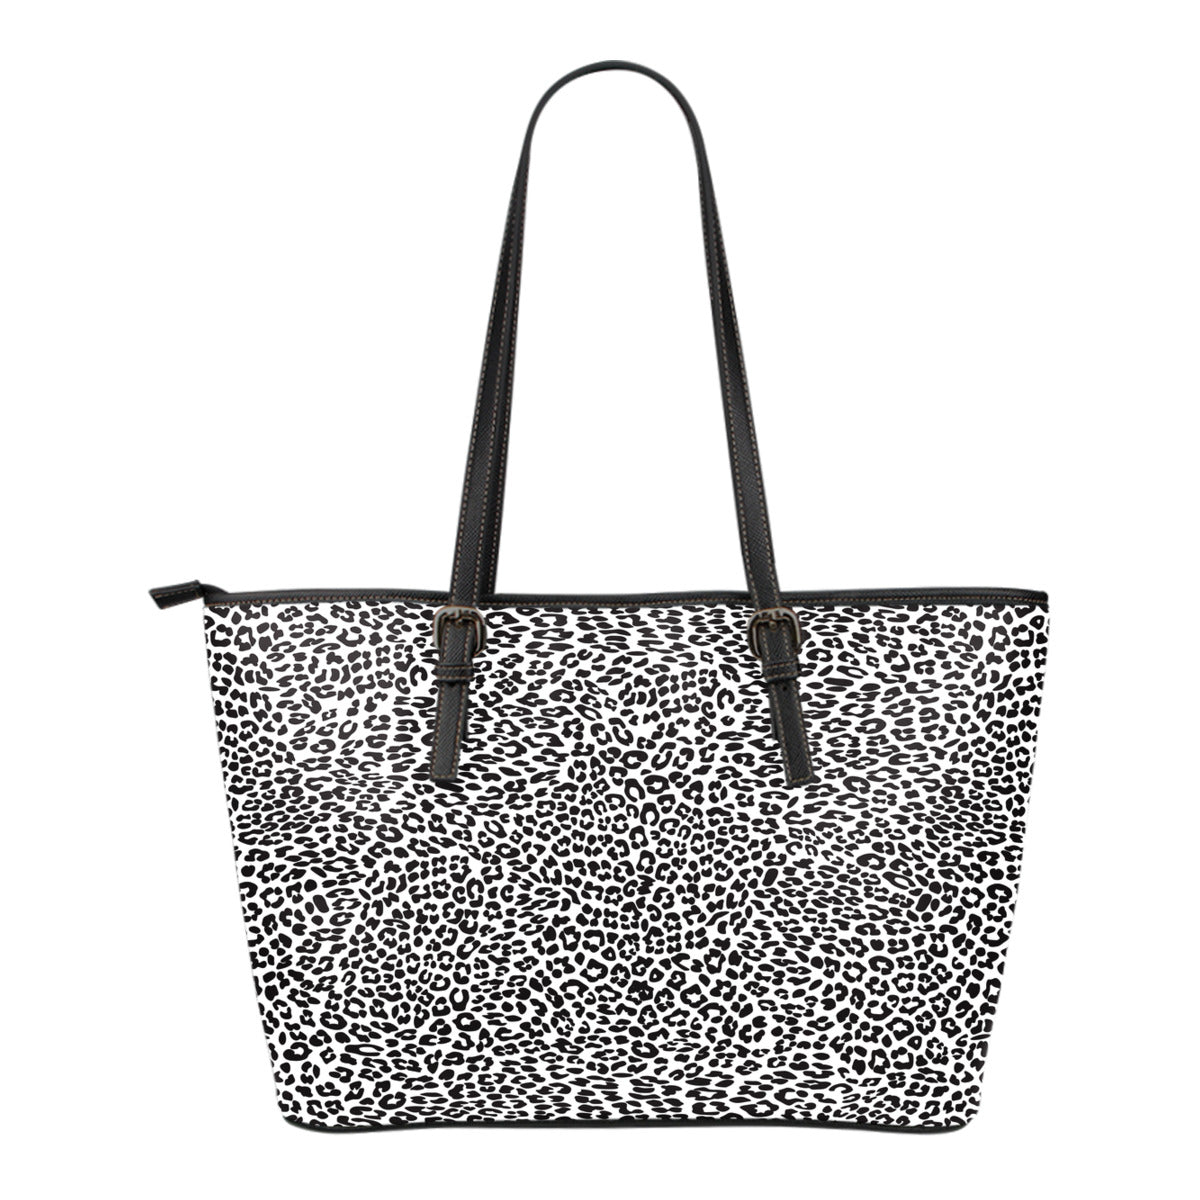 Animal Print BW Themed Design C1 Women Small Leather Tote Bag